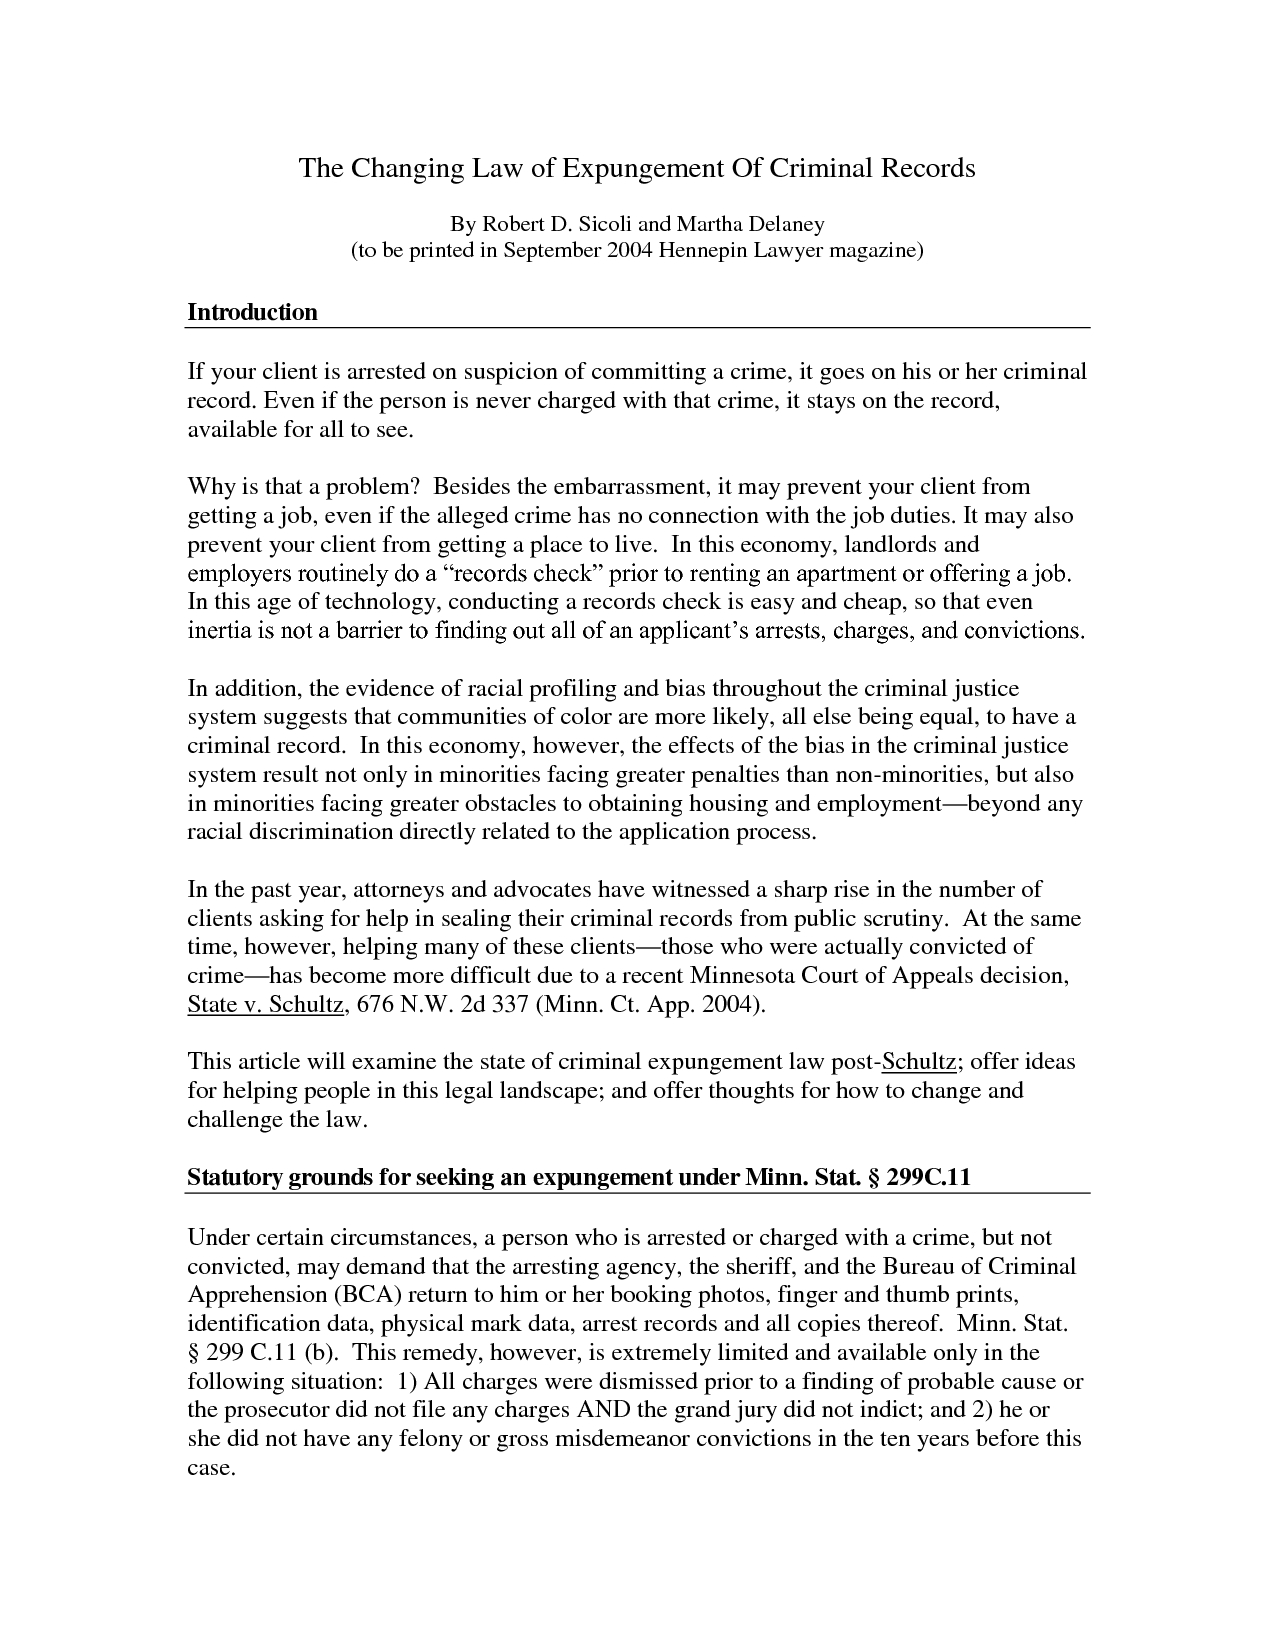 Sample Character Reference Letter For Volunteer Resume within dimensions 1275 X 1650